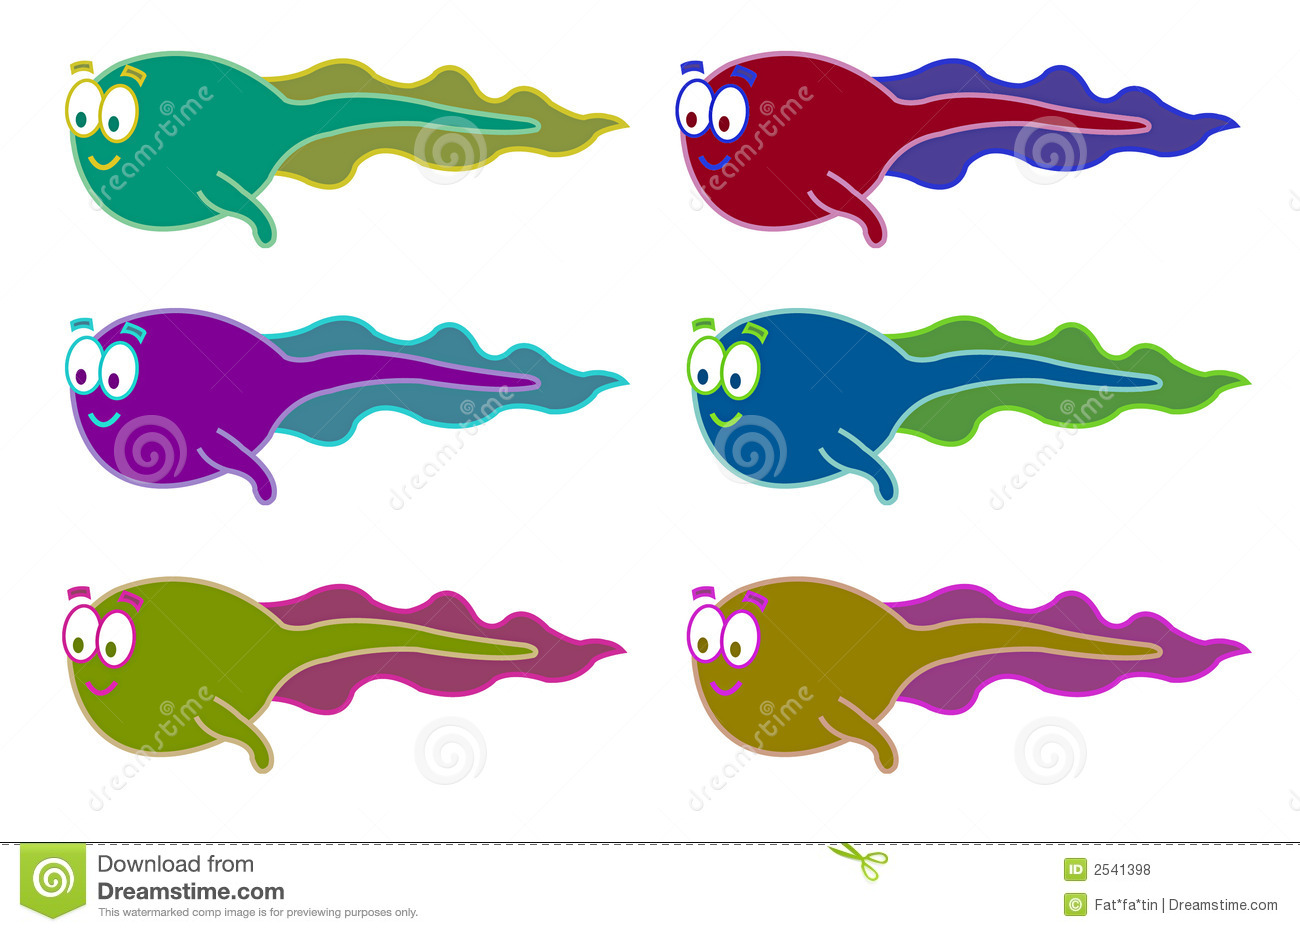 Tadpole Clipart Black And White Clipart Panda Free Clipart Images